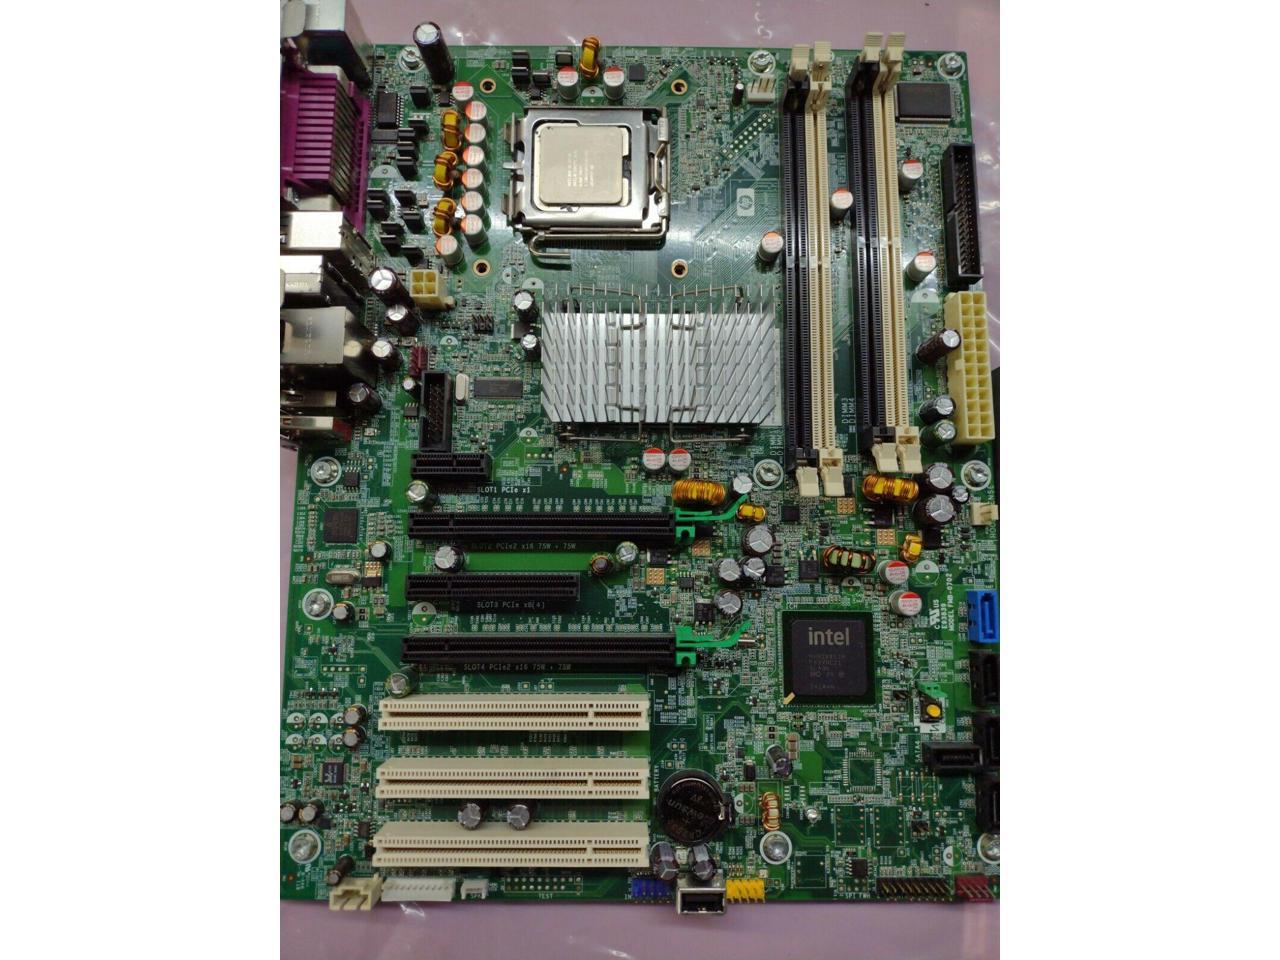 Hp Xw4600 Workstation 441449-001 Motherboard Lga775 With Cpu E7200 2.53Ghz